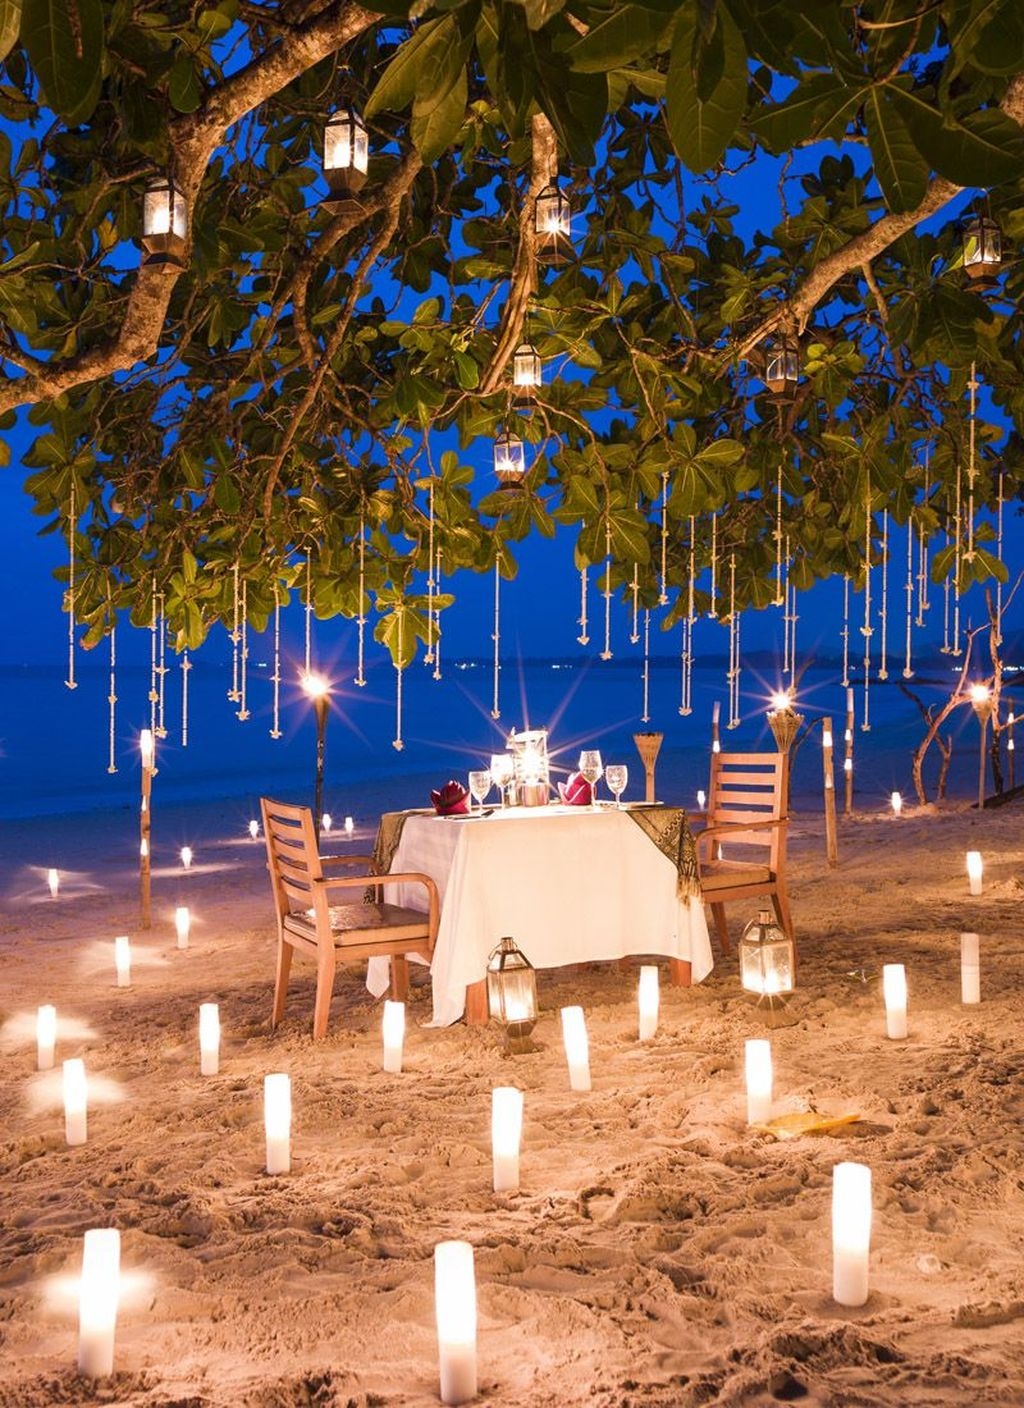 romantic places to visit at night near me